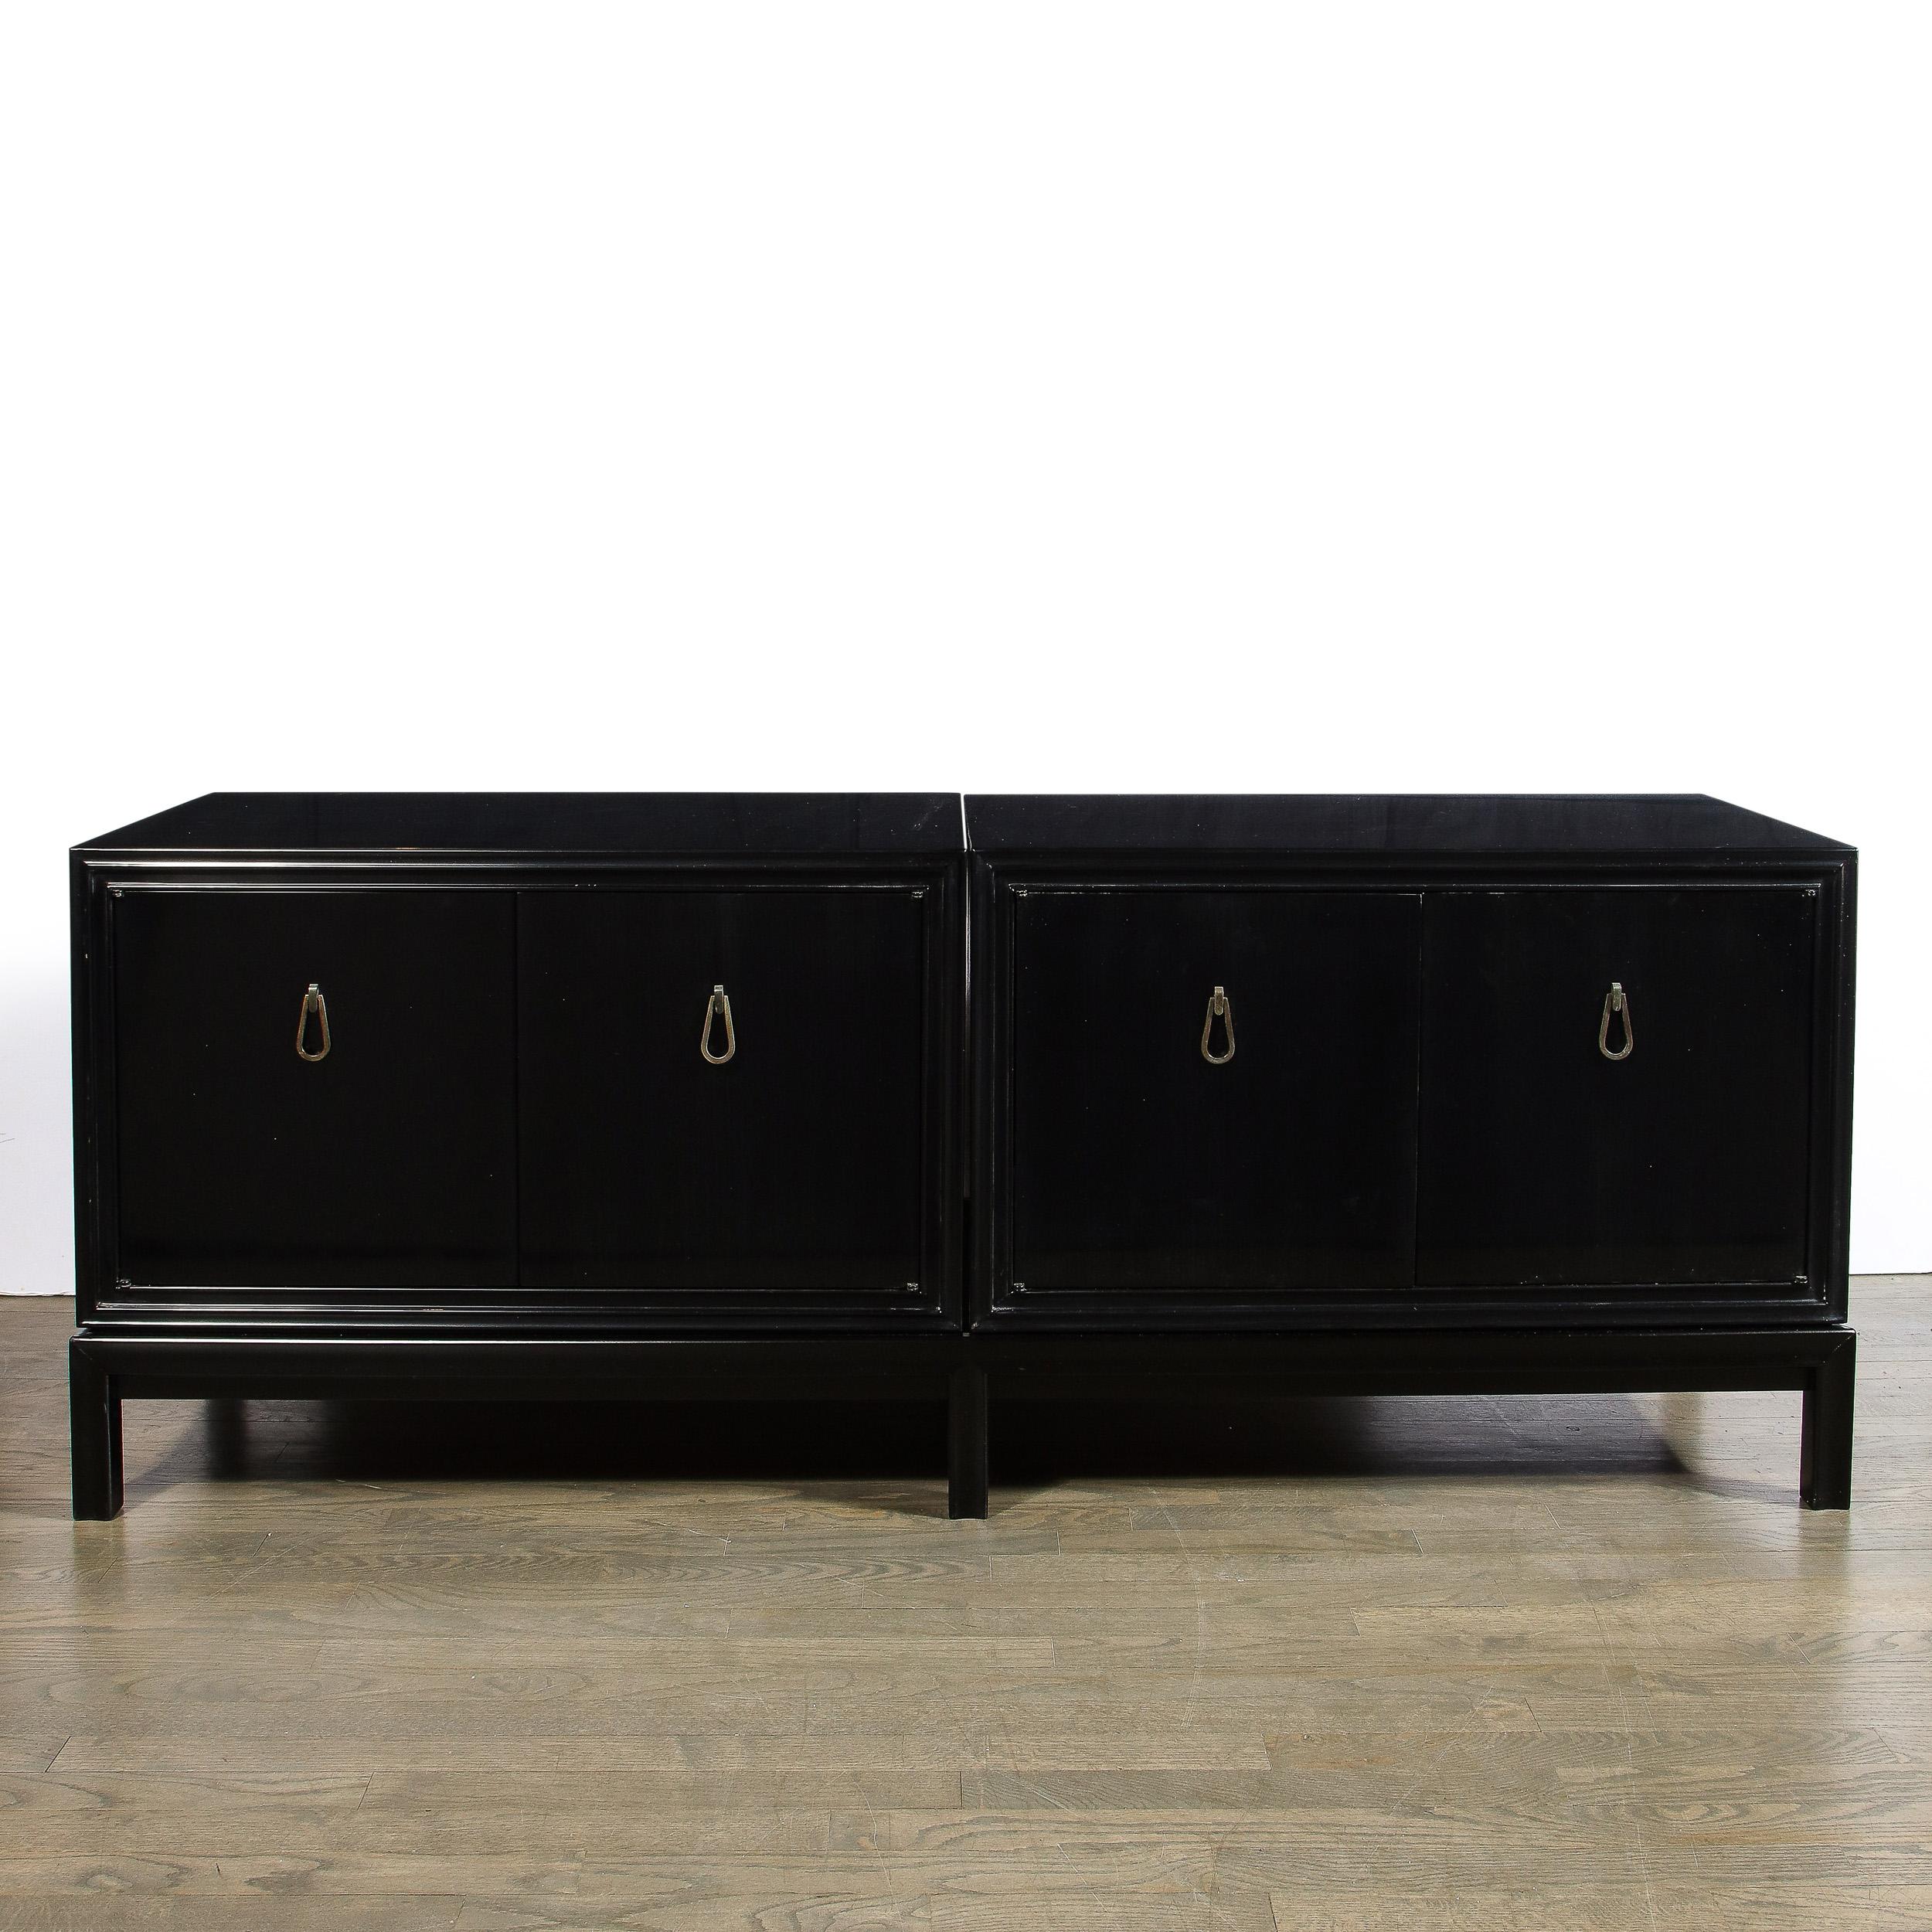 This stunning Mid-Century Modern cabinet was realized by the illustrious designer Renzo Rutili in Italy circa 1950. It features two volumetric rectangular ebonzed walnut bodies that adjoin to create a single elongated form replete with teardrop form